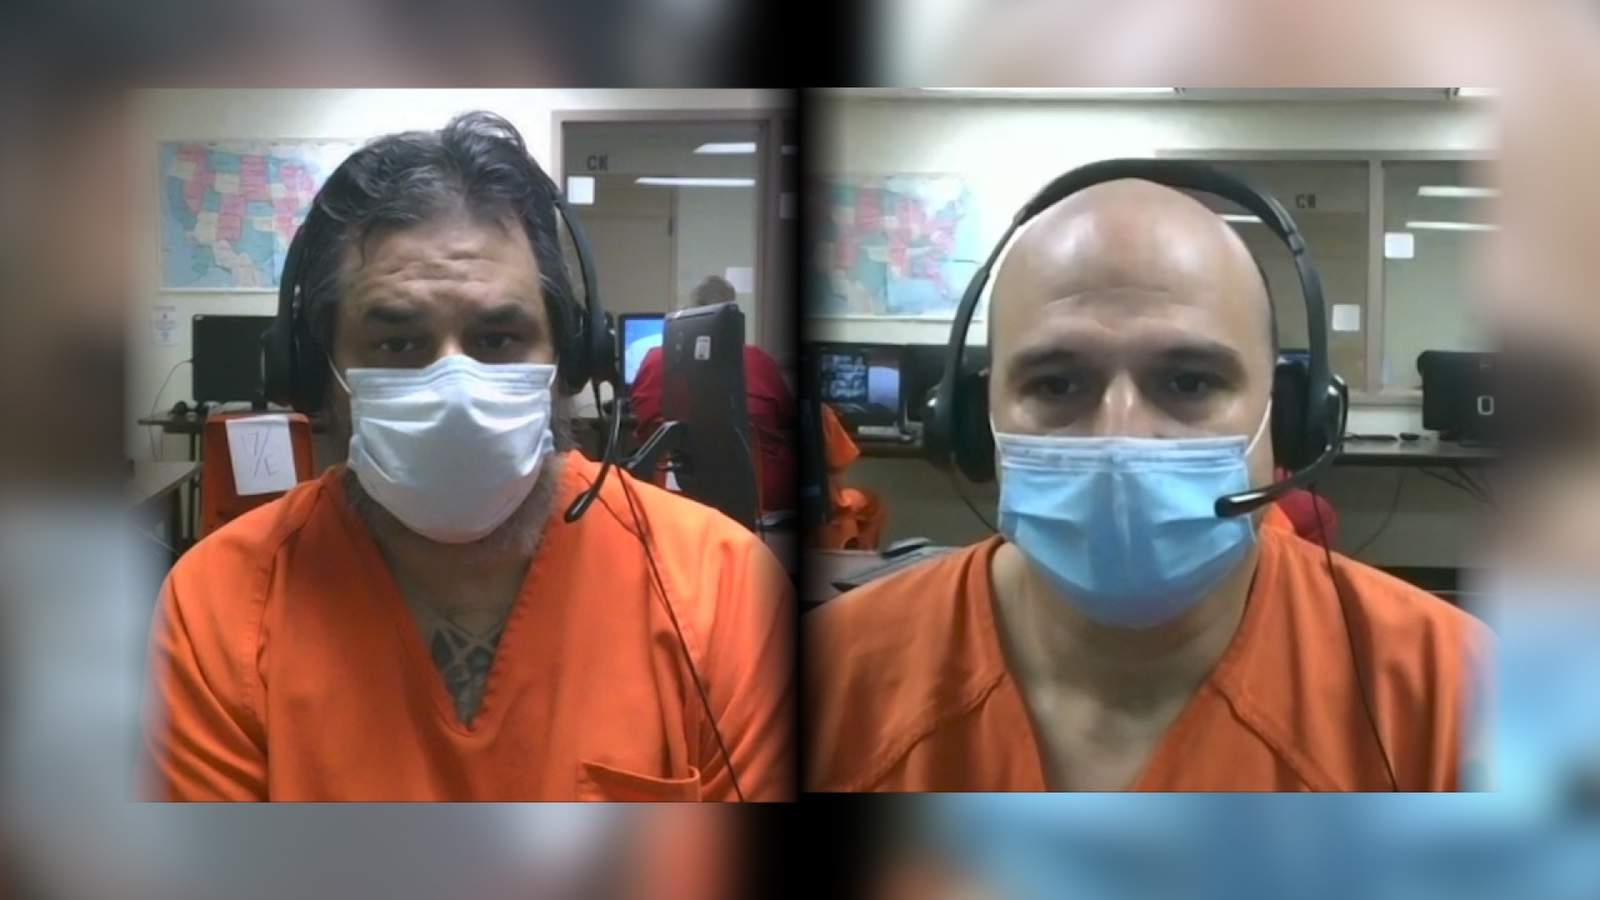 Judge orders 2 prison inmates freed during remote hearing